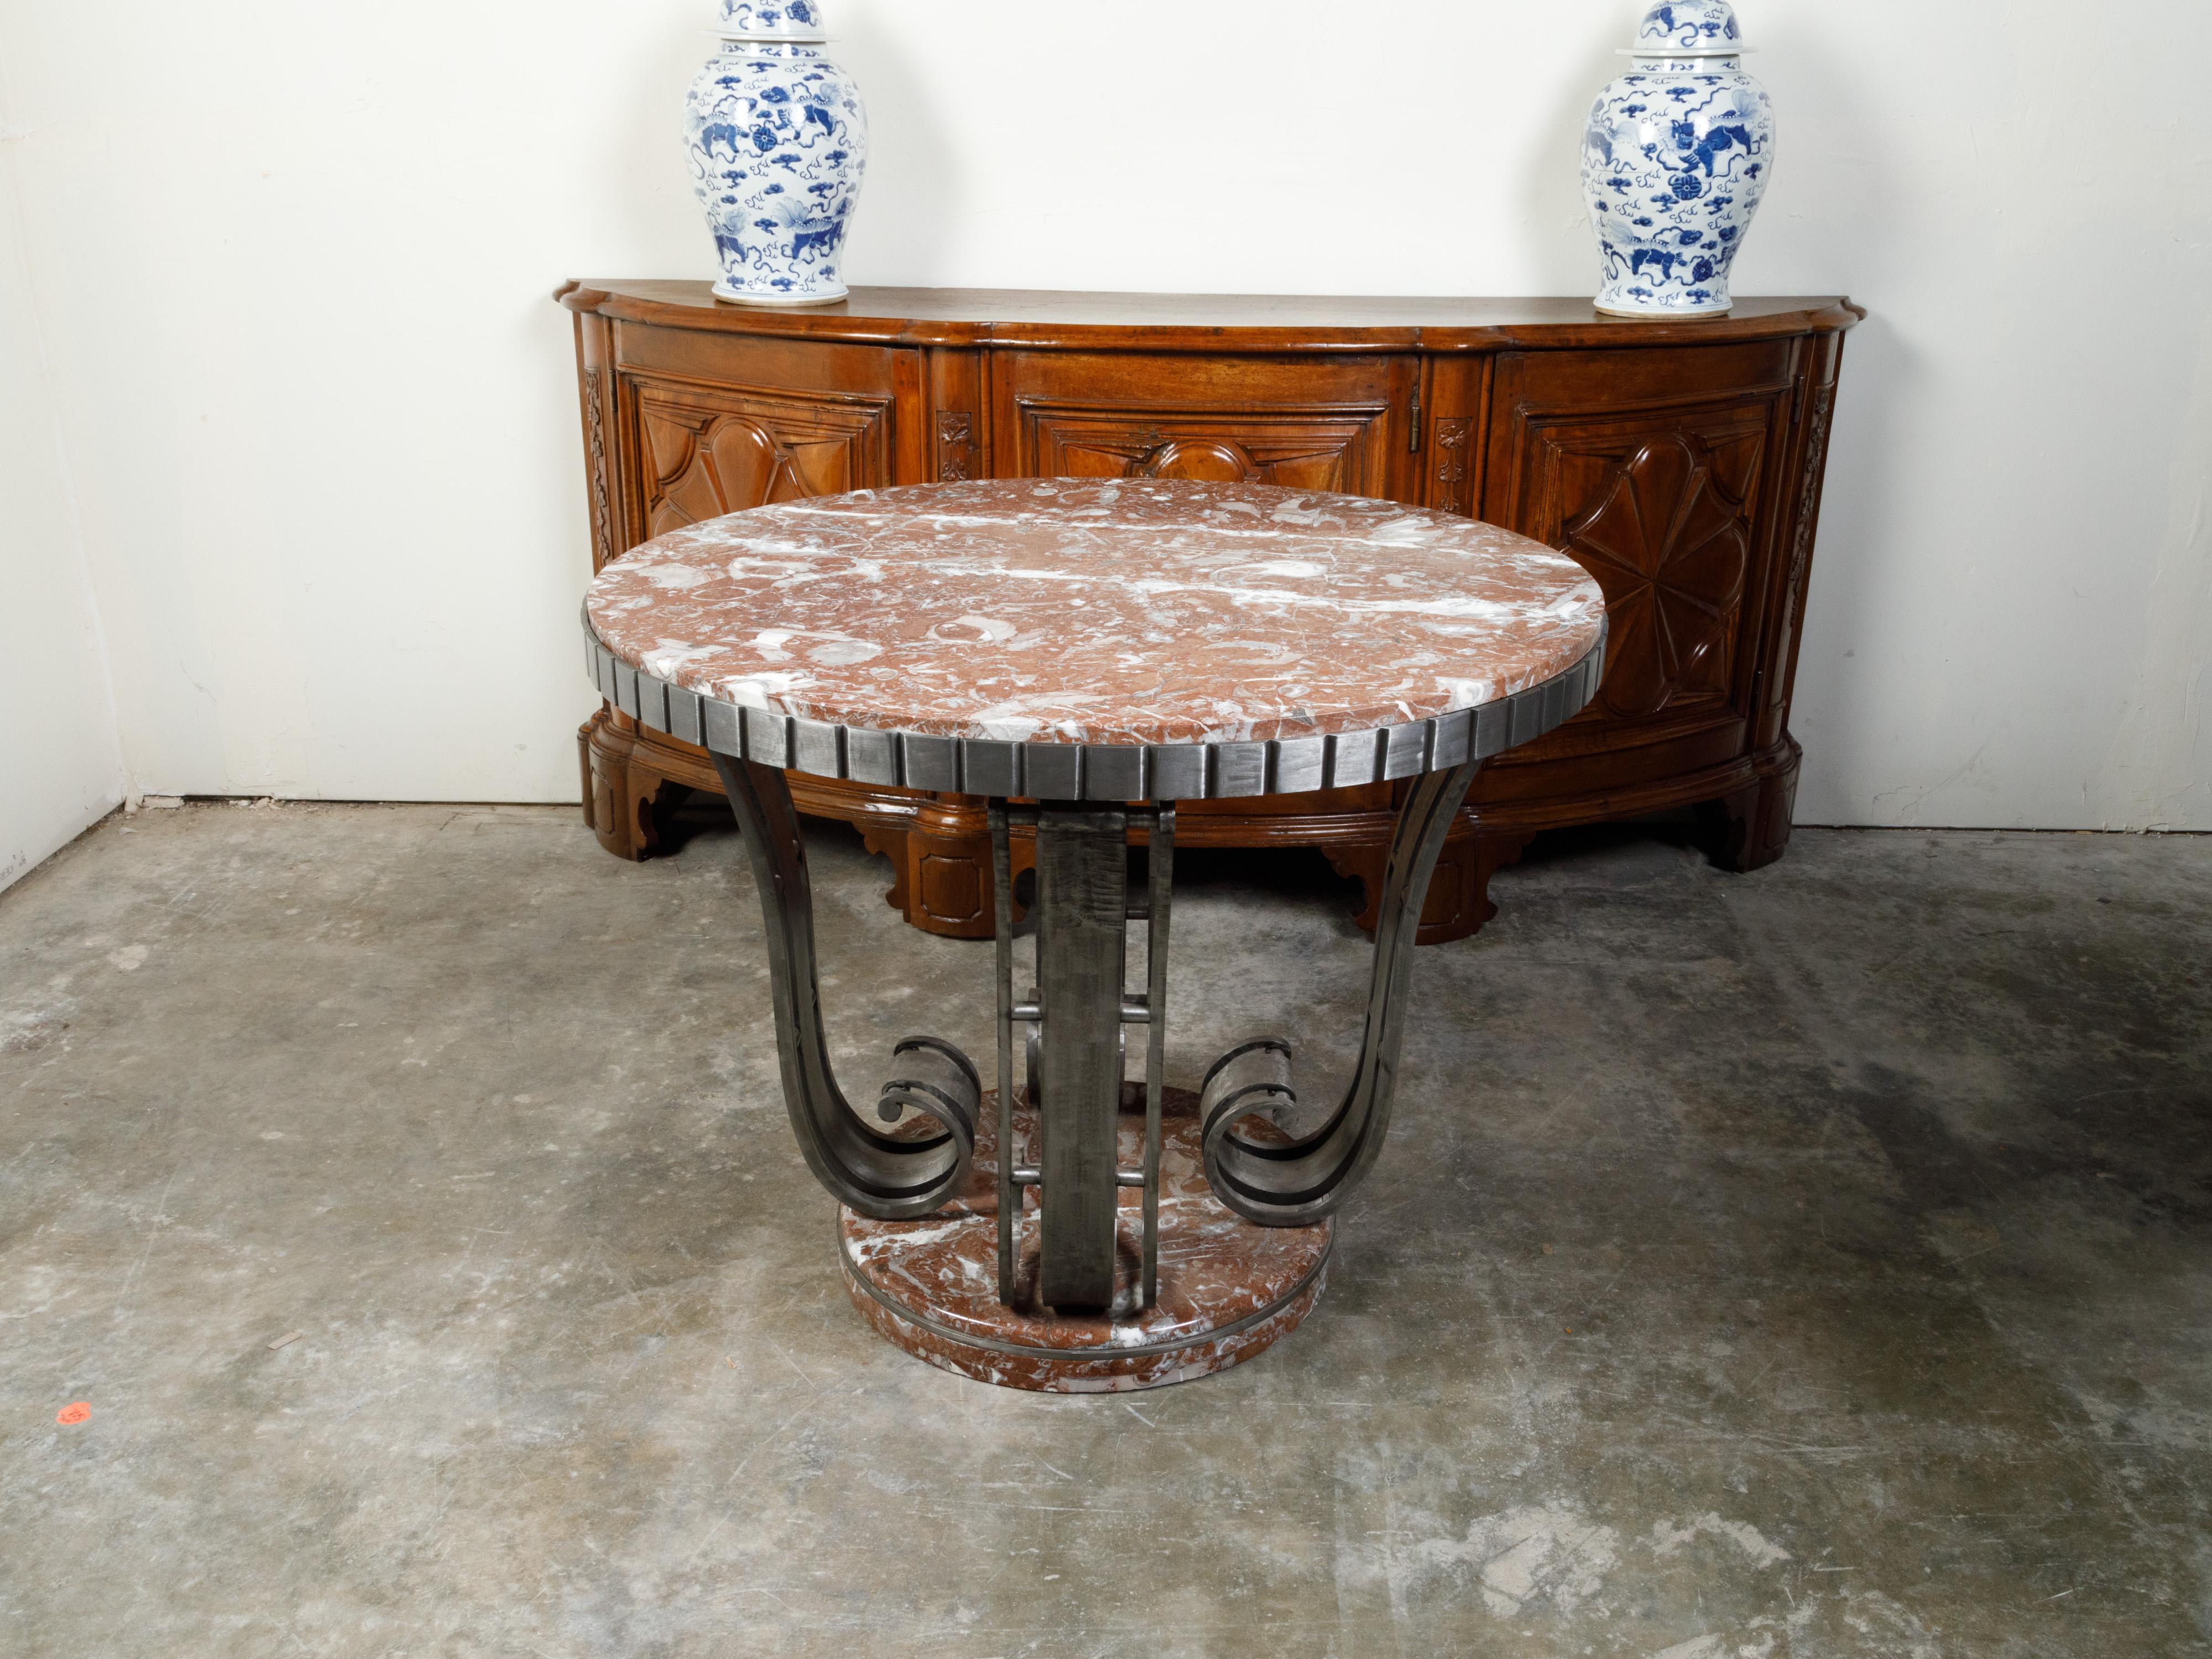 A French Raymond Subes Art Deco period side table from the early 20th century, with steel scrolling base and red marble top. Created in France during the first quarter of the 20th century, this Art Deco table features a circular red marble top